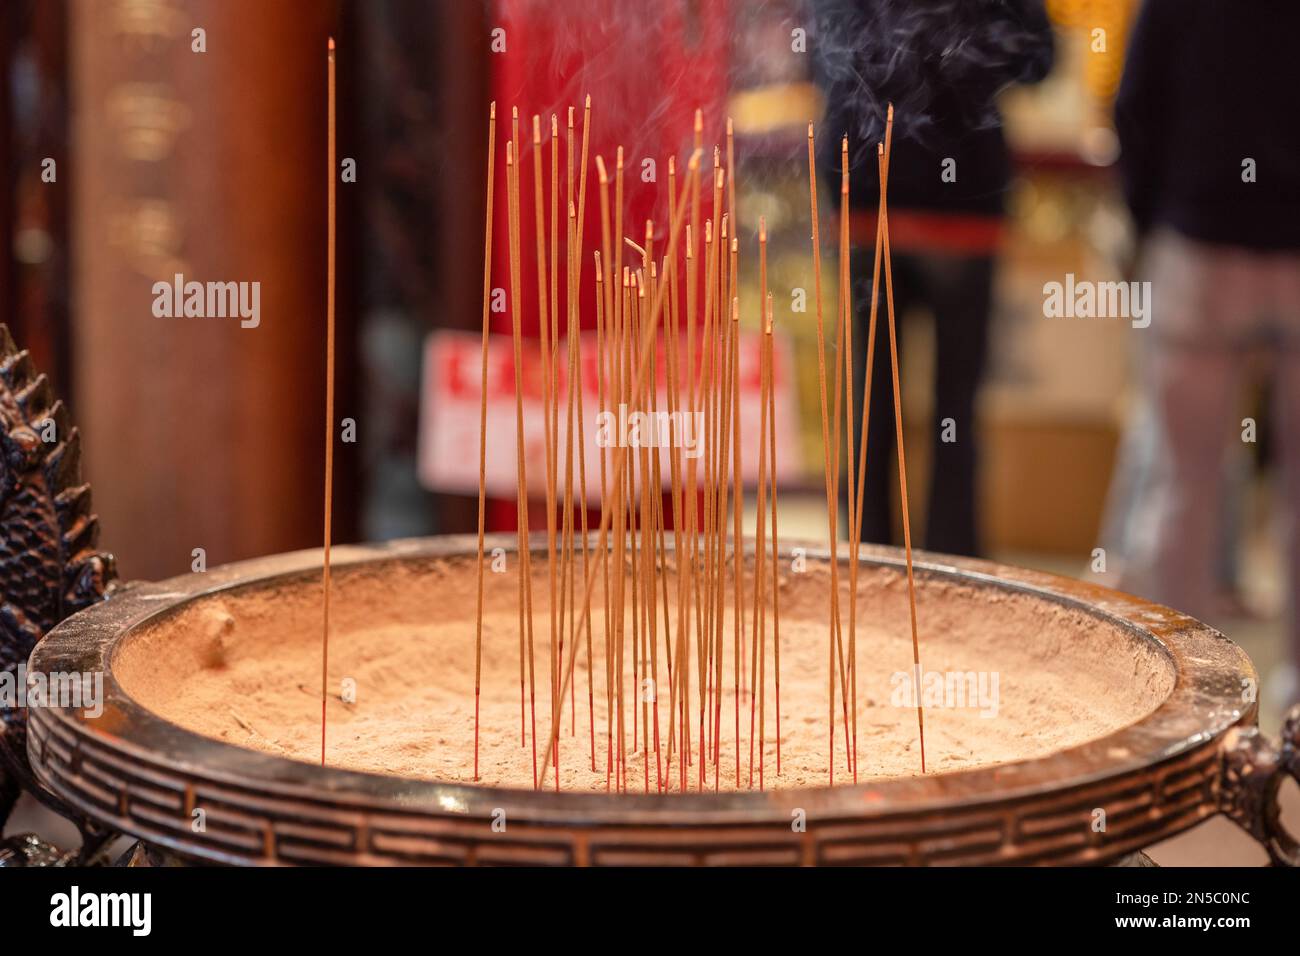 Incense burner with smoke and sticks of burning incense. Stock Photo